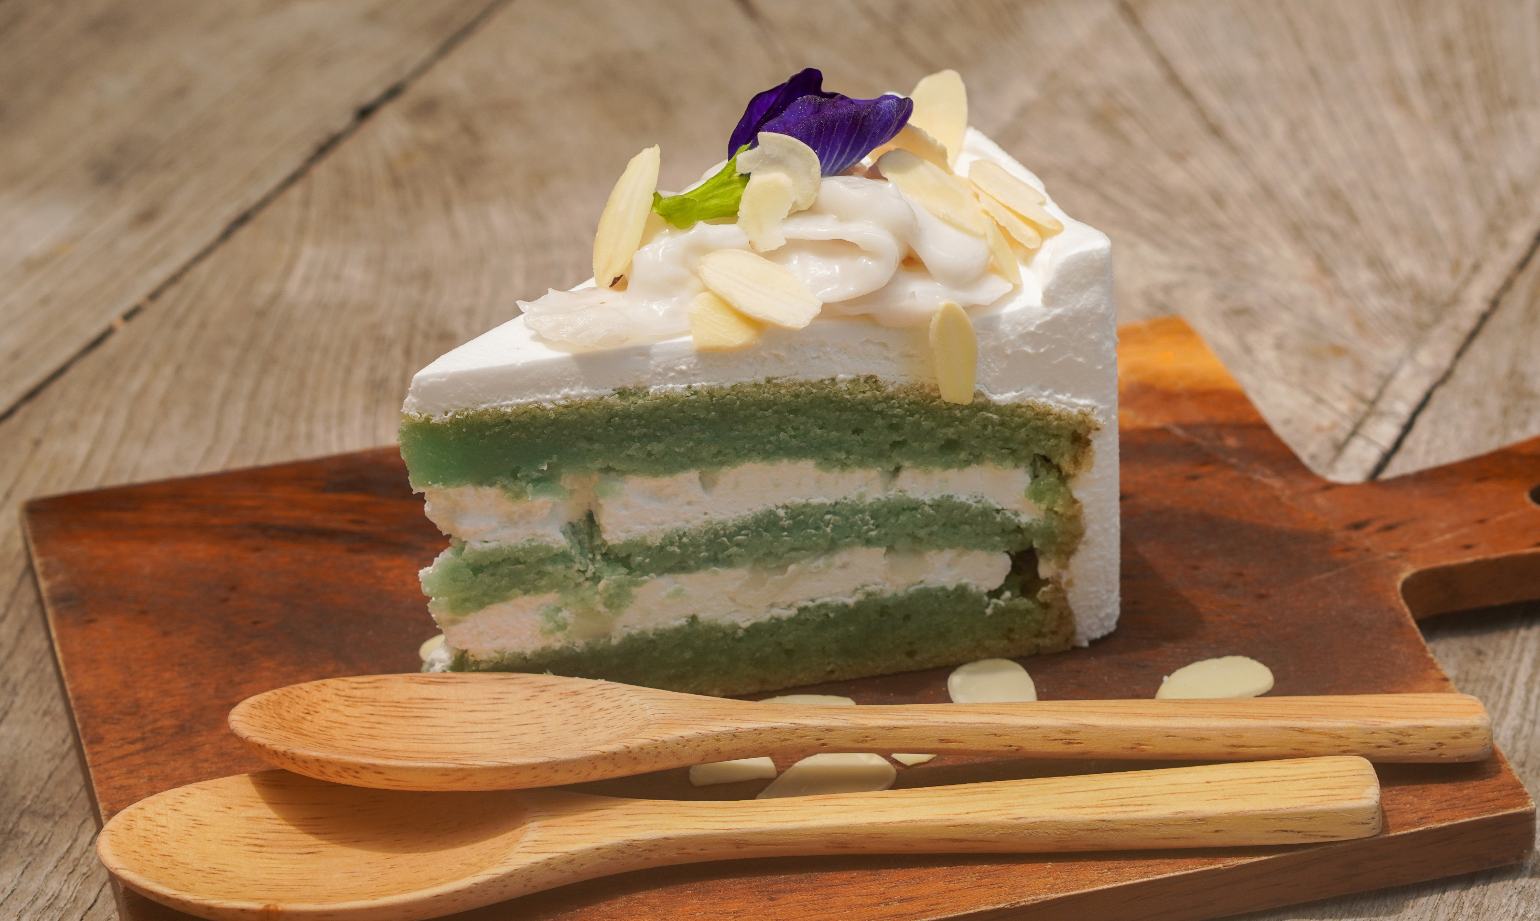 Slice of a pea and vanilla cake with laminated almonds, on a wooden cutting board.